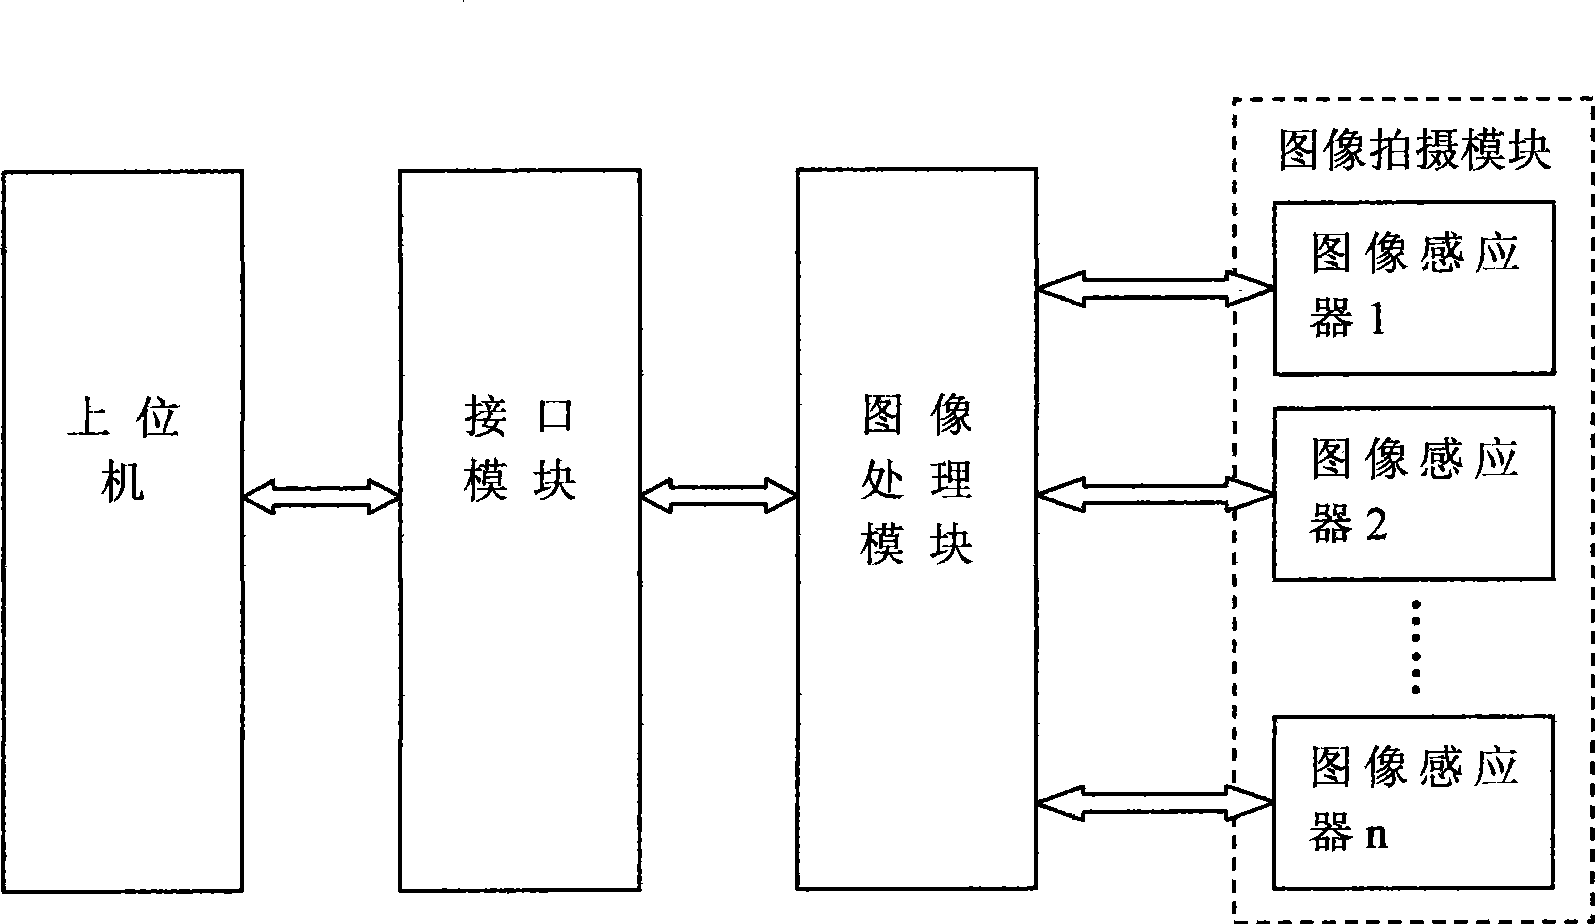 Image processing process for touch screen positioning